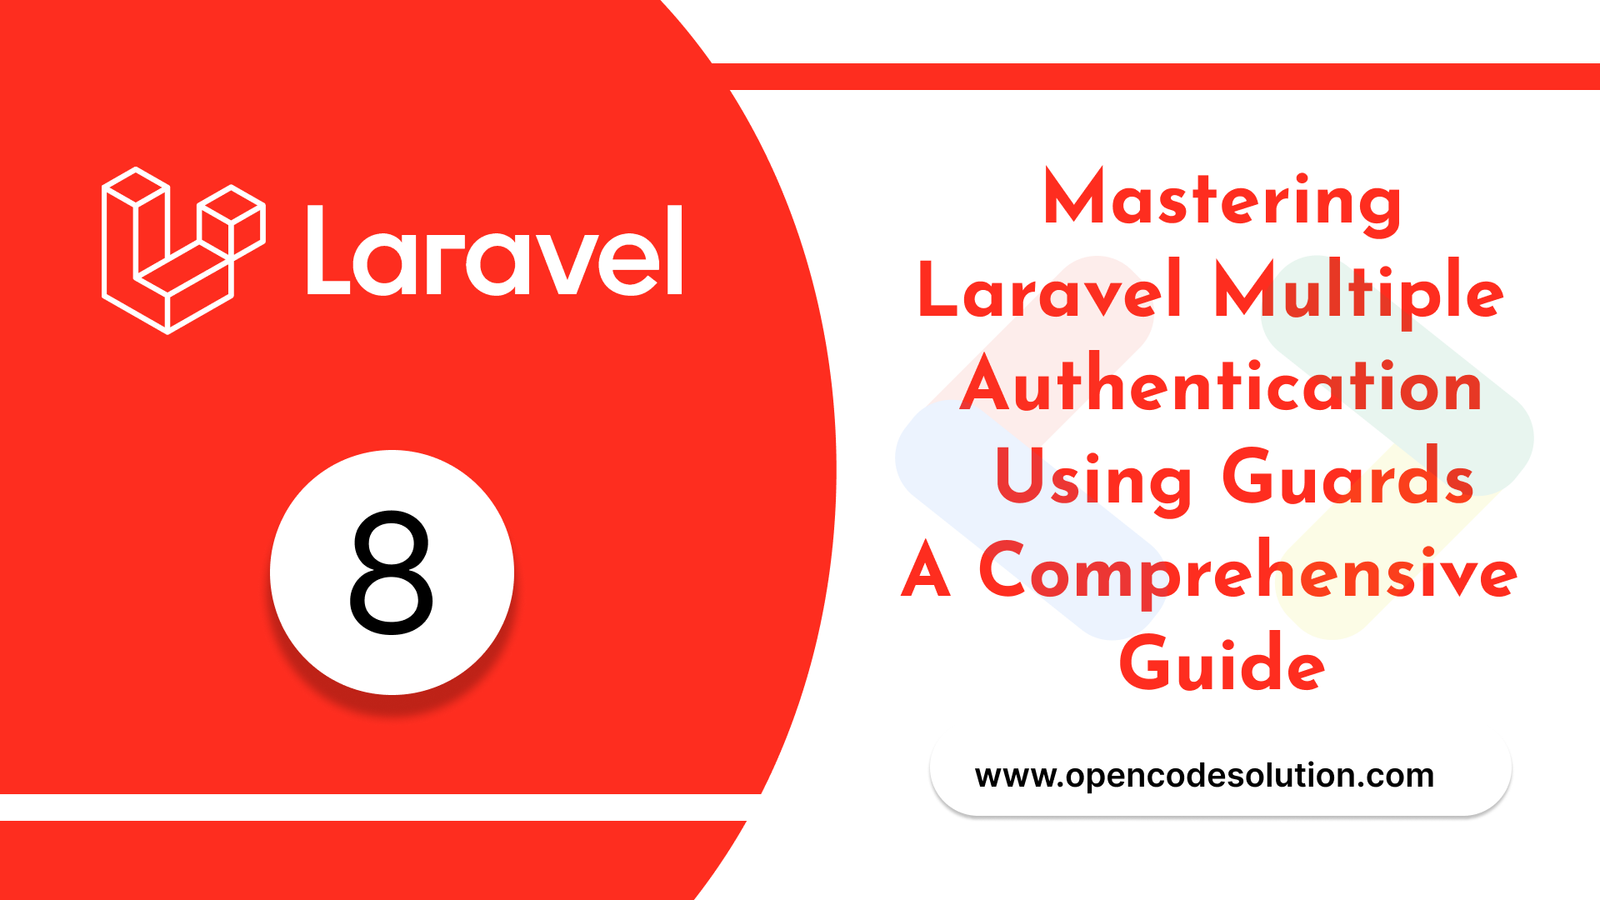 Mastering Laravel Multiple Authentication Using Guards - A Comprehensive Guide